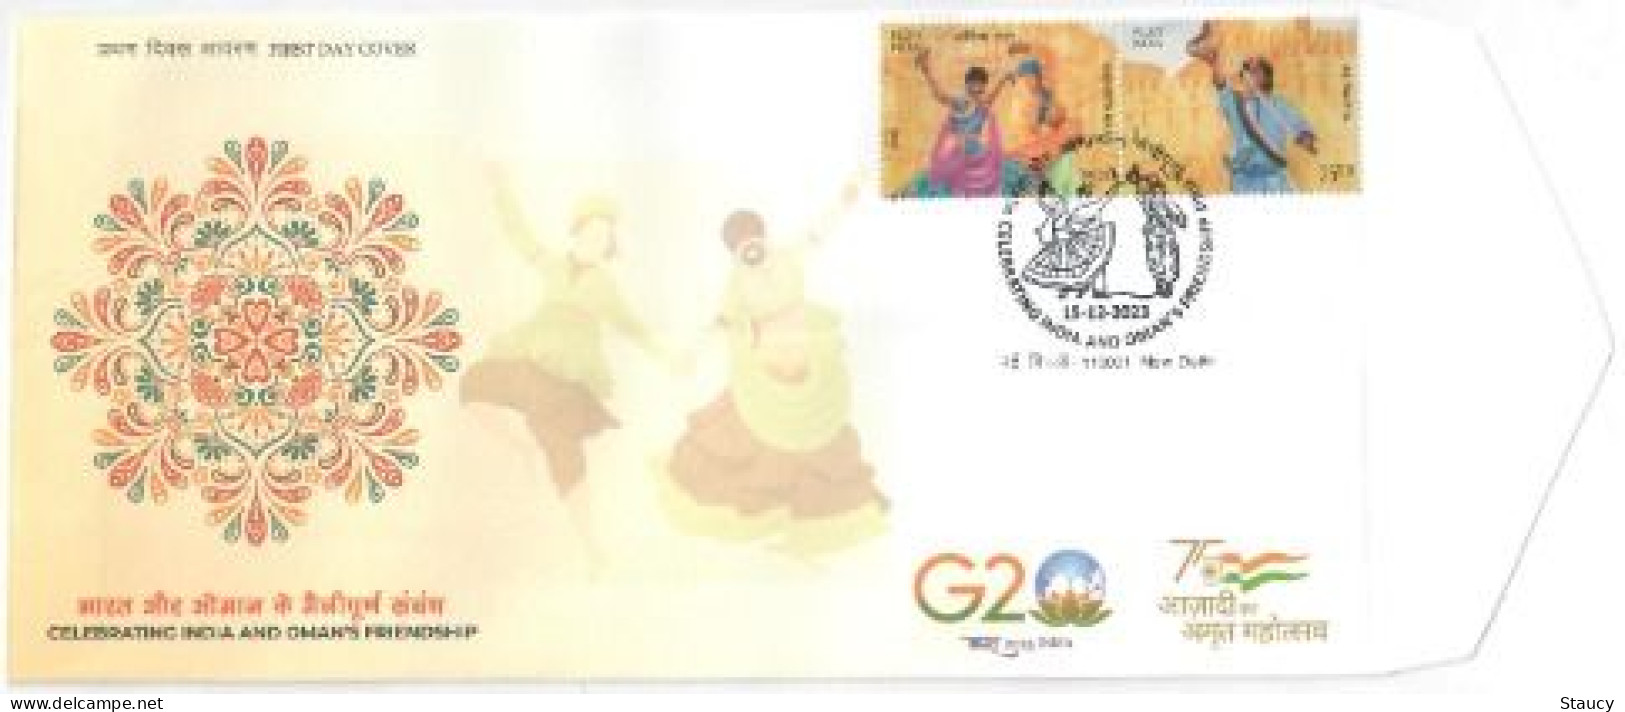 India 2023 India – OMAN Joint Issue FIRST DAY COVER FDC As Per Scan - Gezamelijke Uitgaven